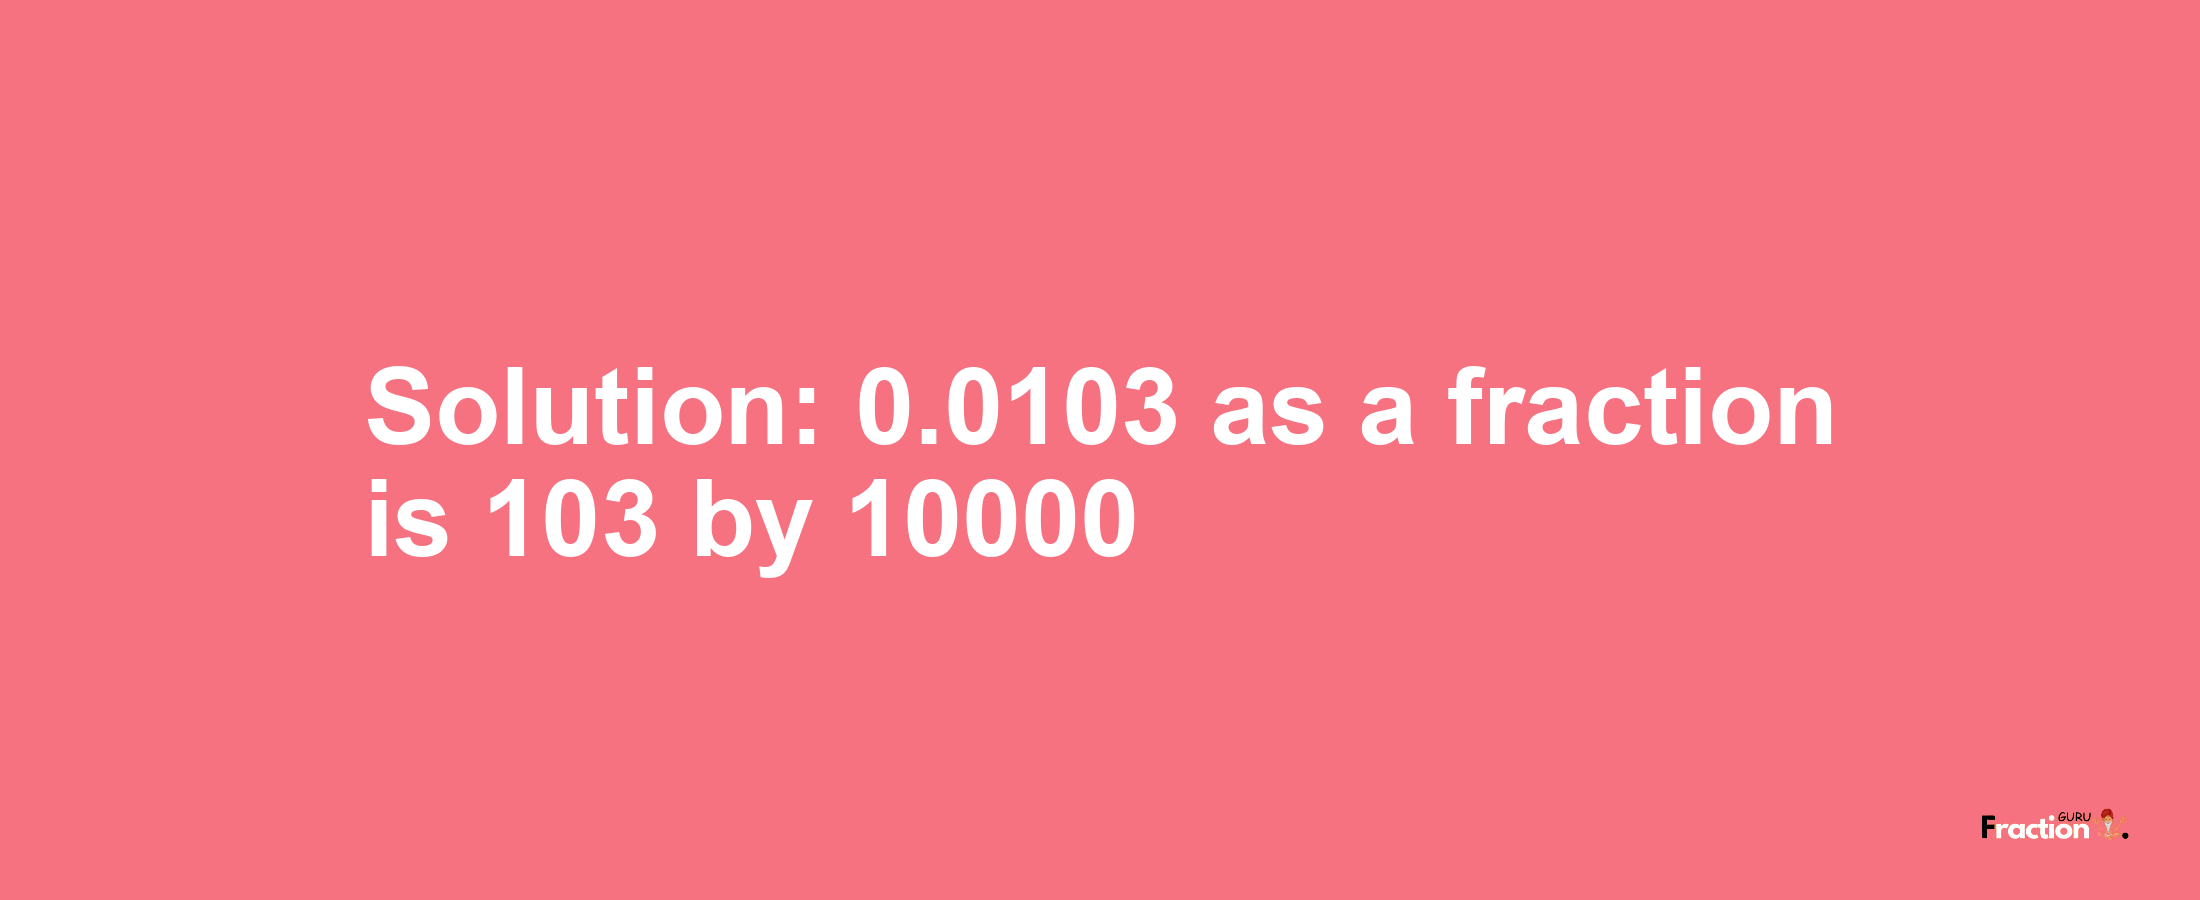 Solution:0.0103 as a fraction is 103/10000